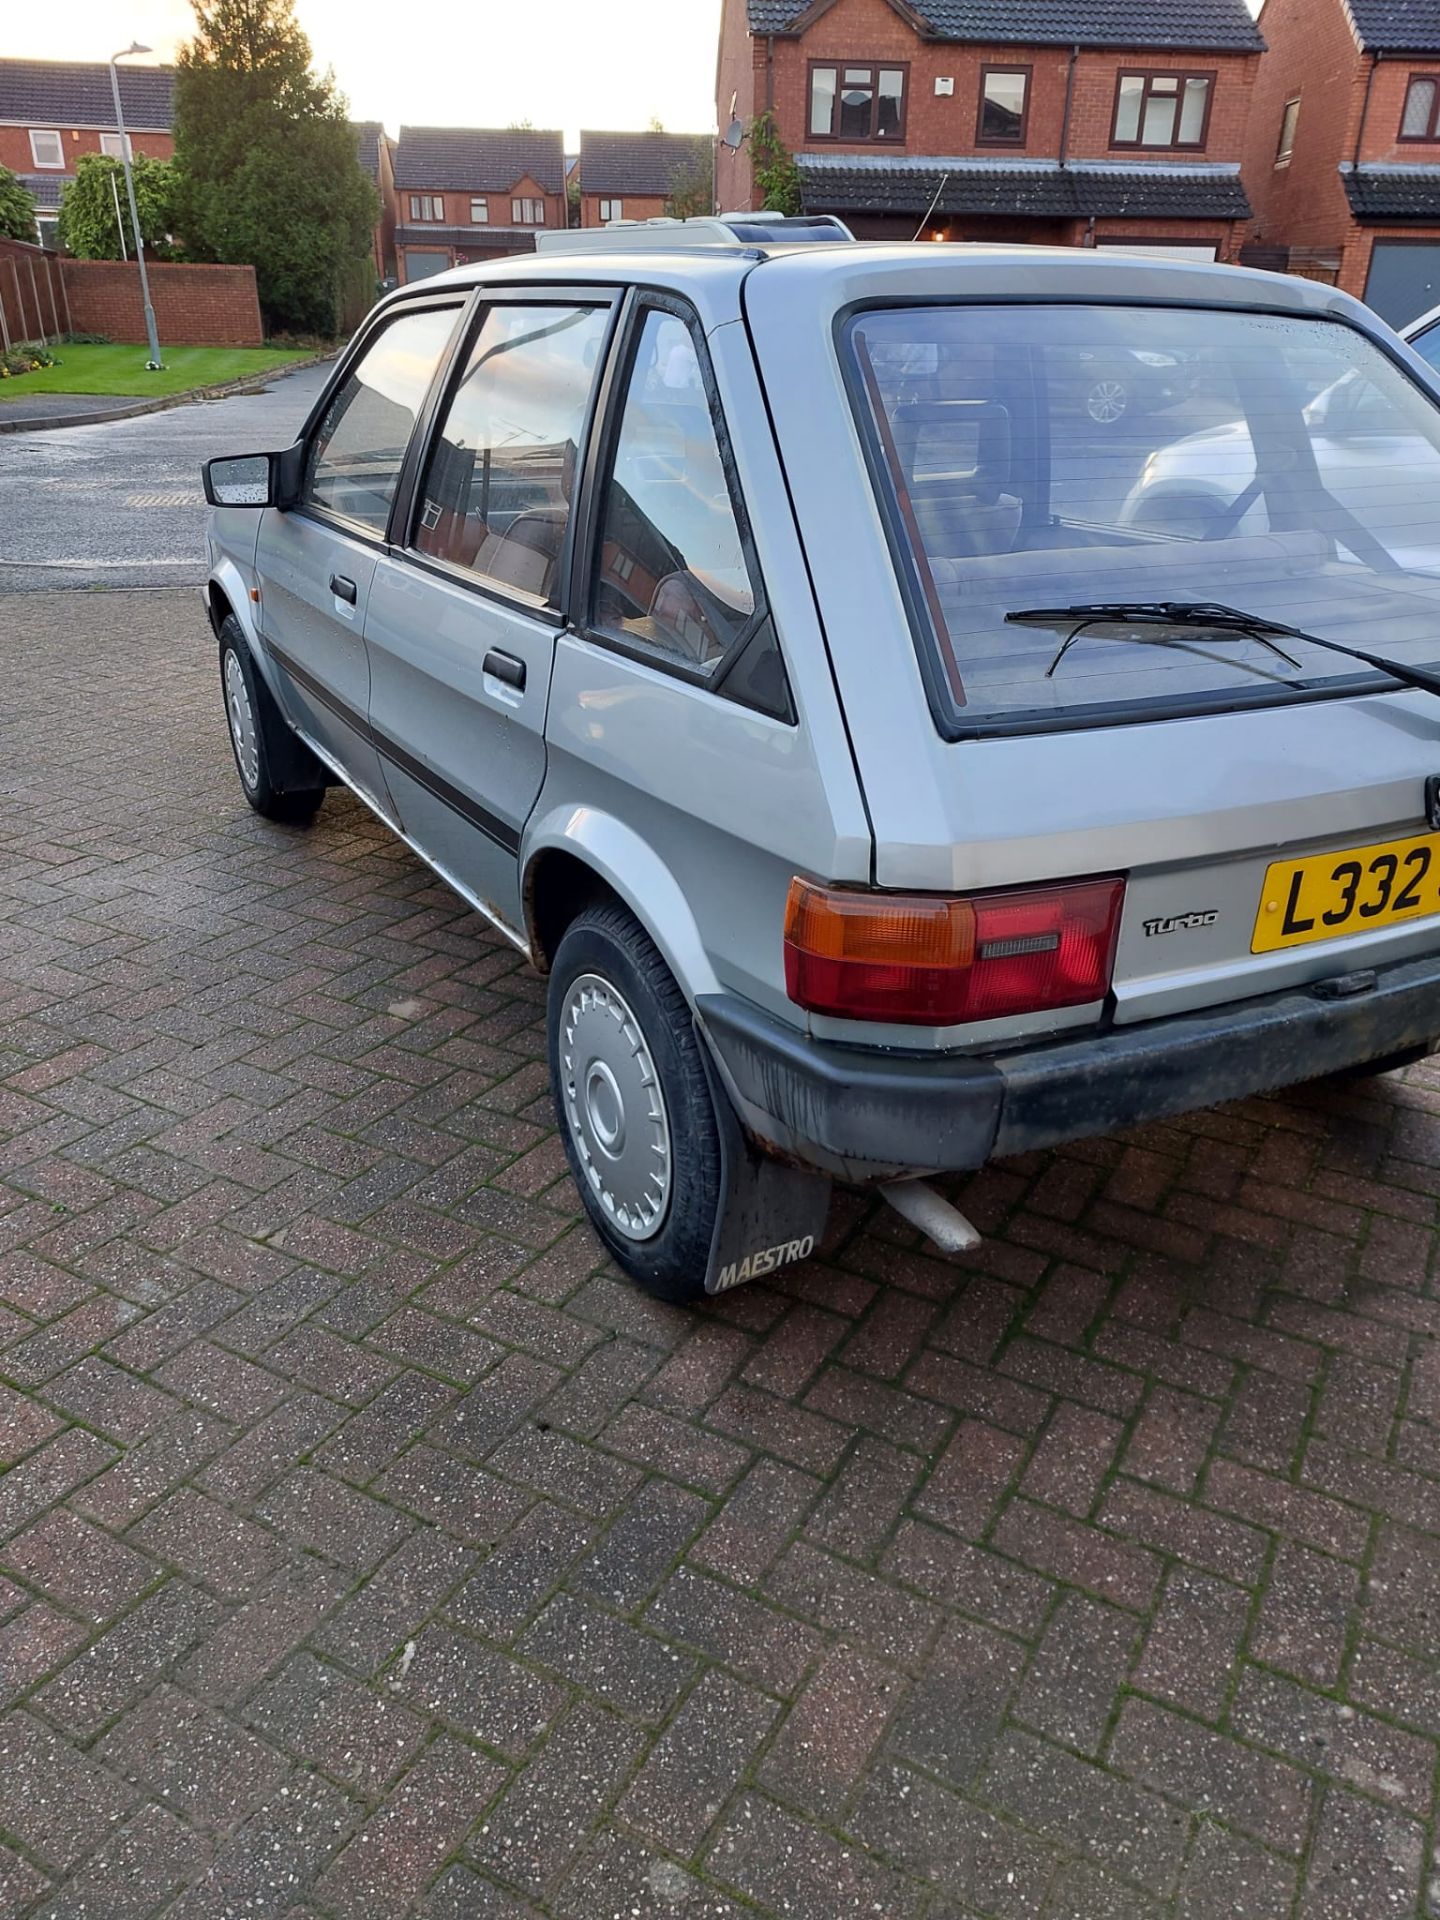 RETRO CLASSIC ROVER MAESTRO CLUBMAN D1993 WITH A 2.0L DIESEL TURBO ENGINE - ONLY 58K MILES - Image 6 of 12